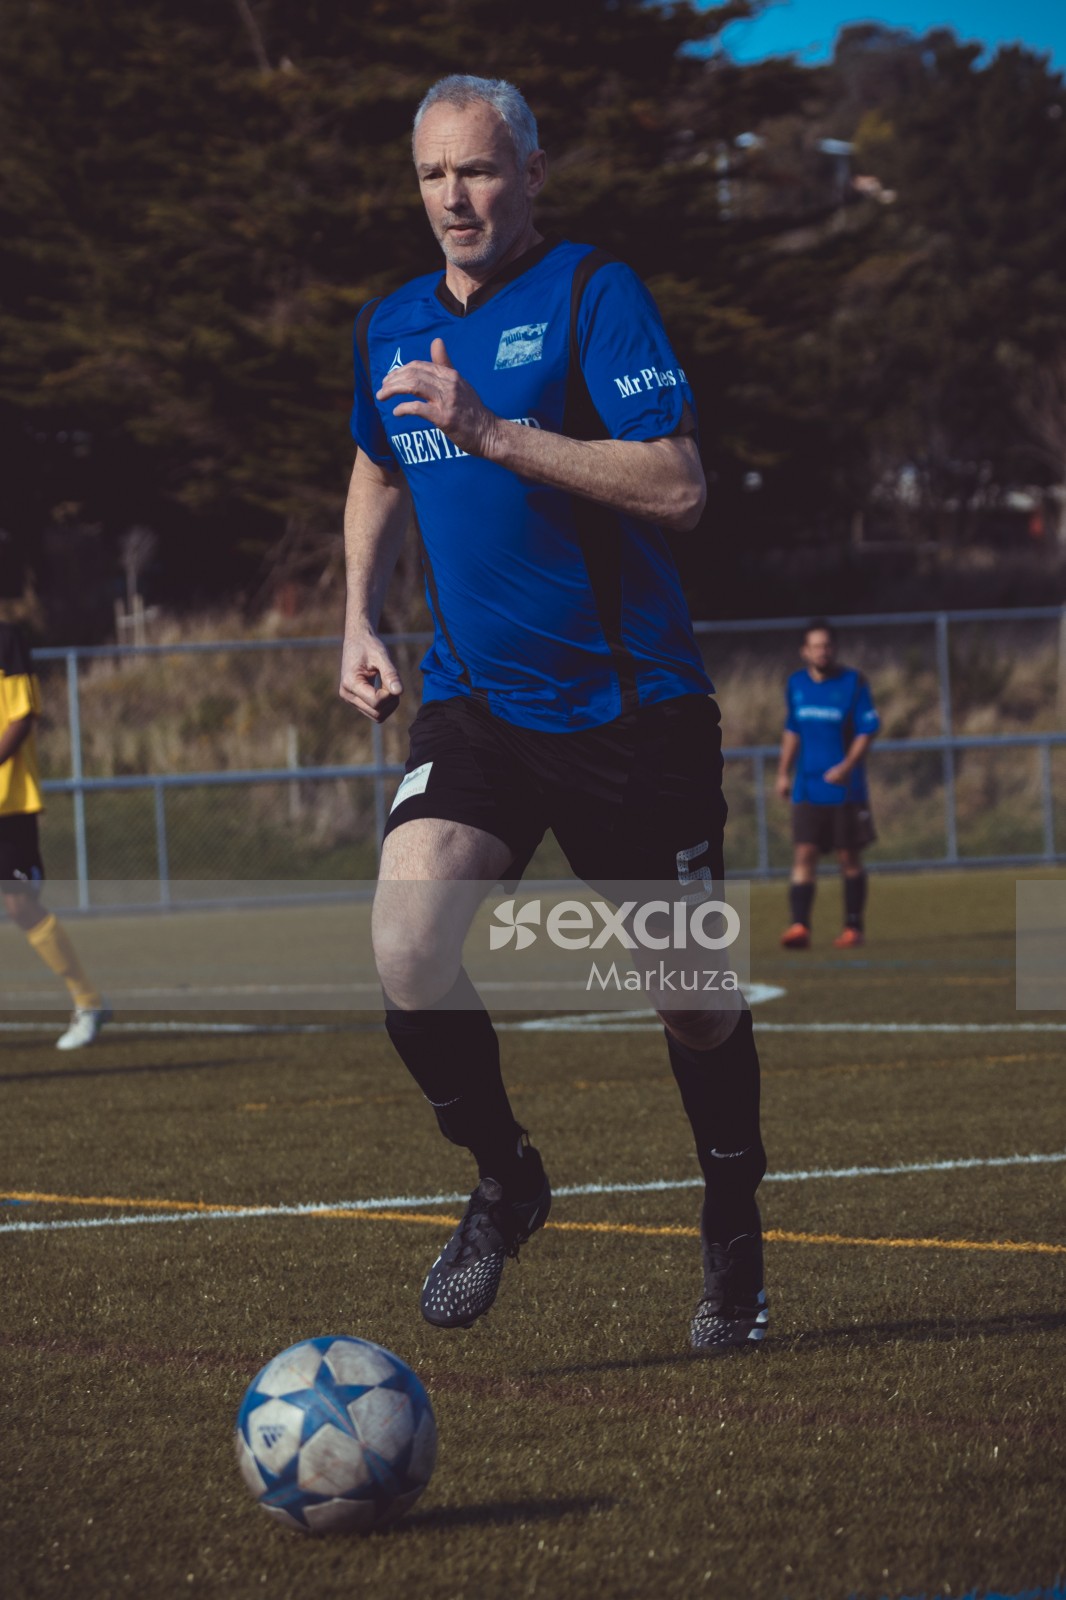 Old football player in blue shirt at a sports event - Sports Zone sunday league